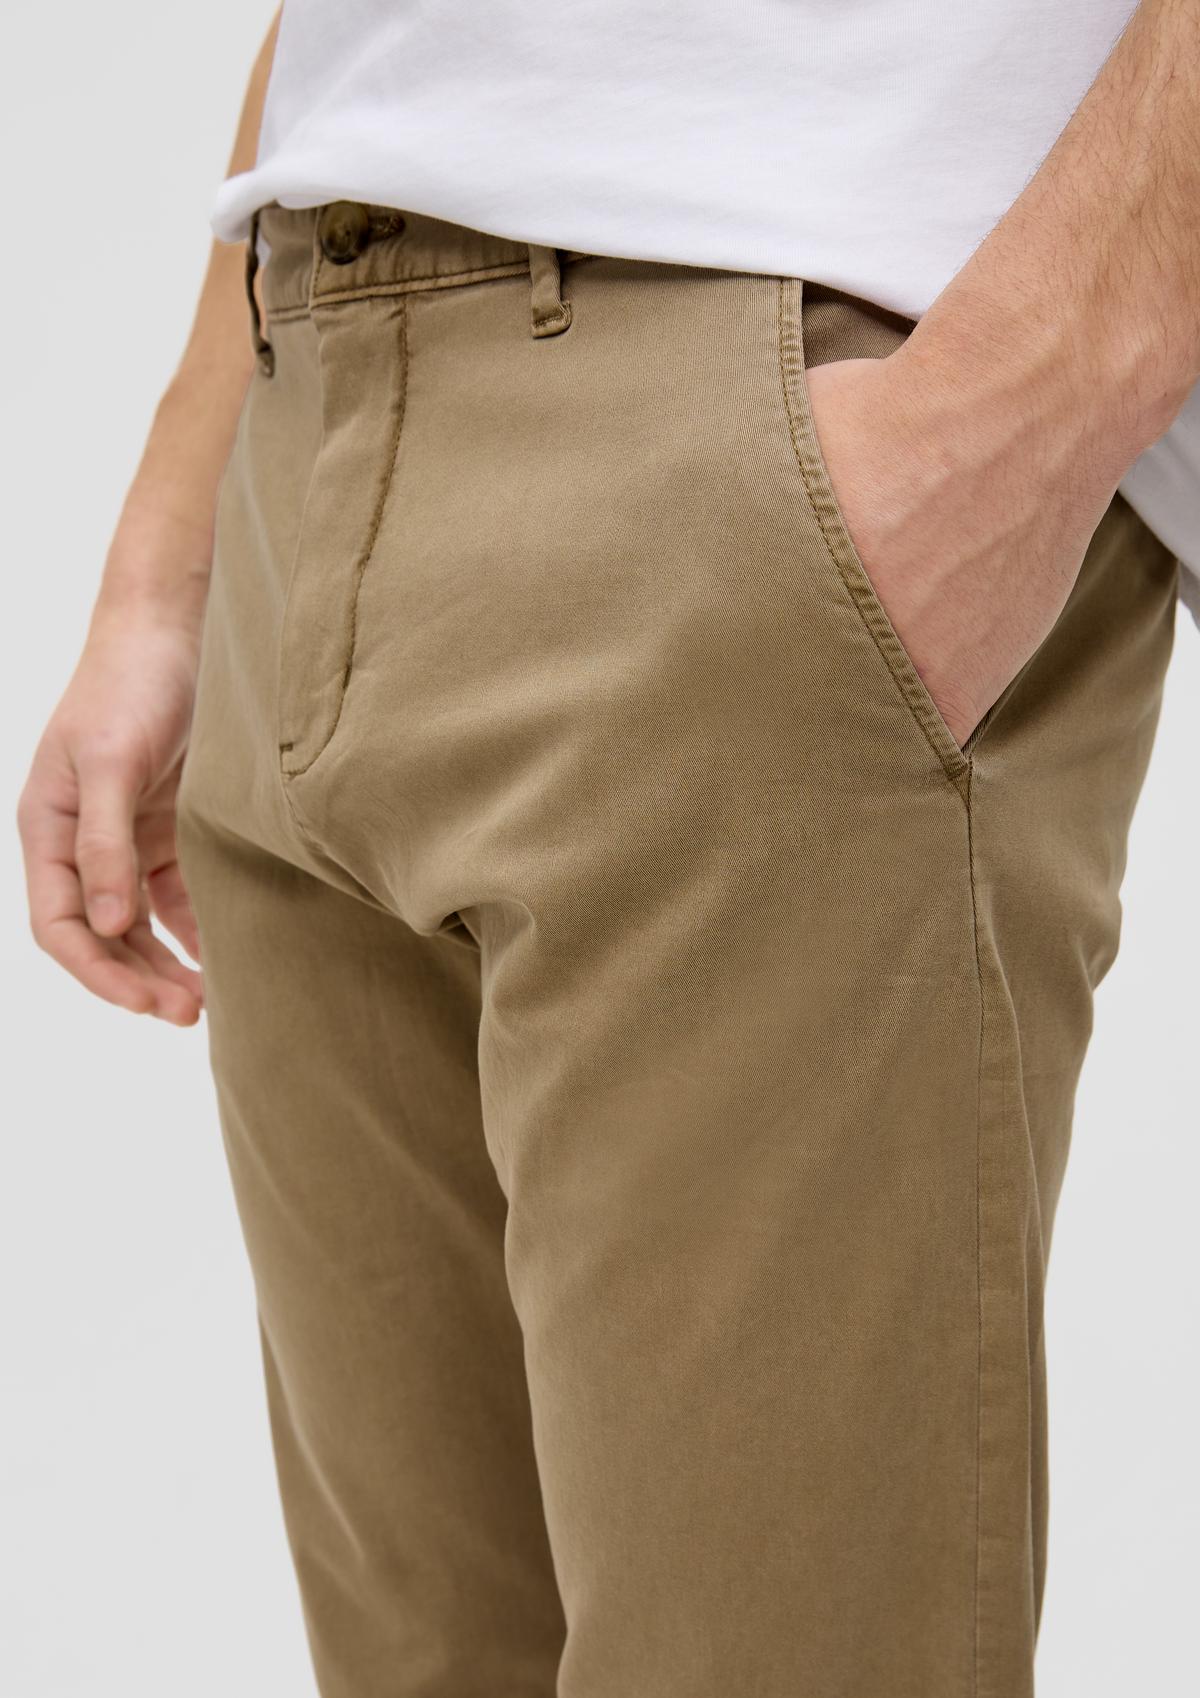 s.Oliver Twill trousers with a slim leg